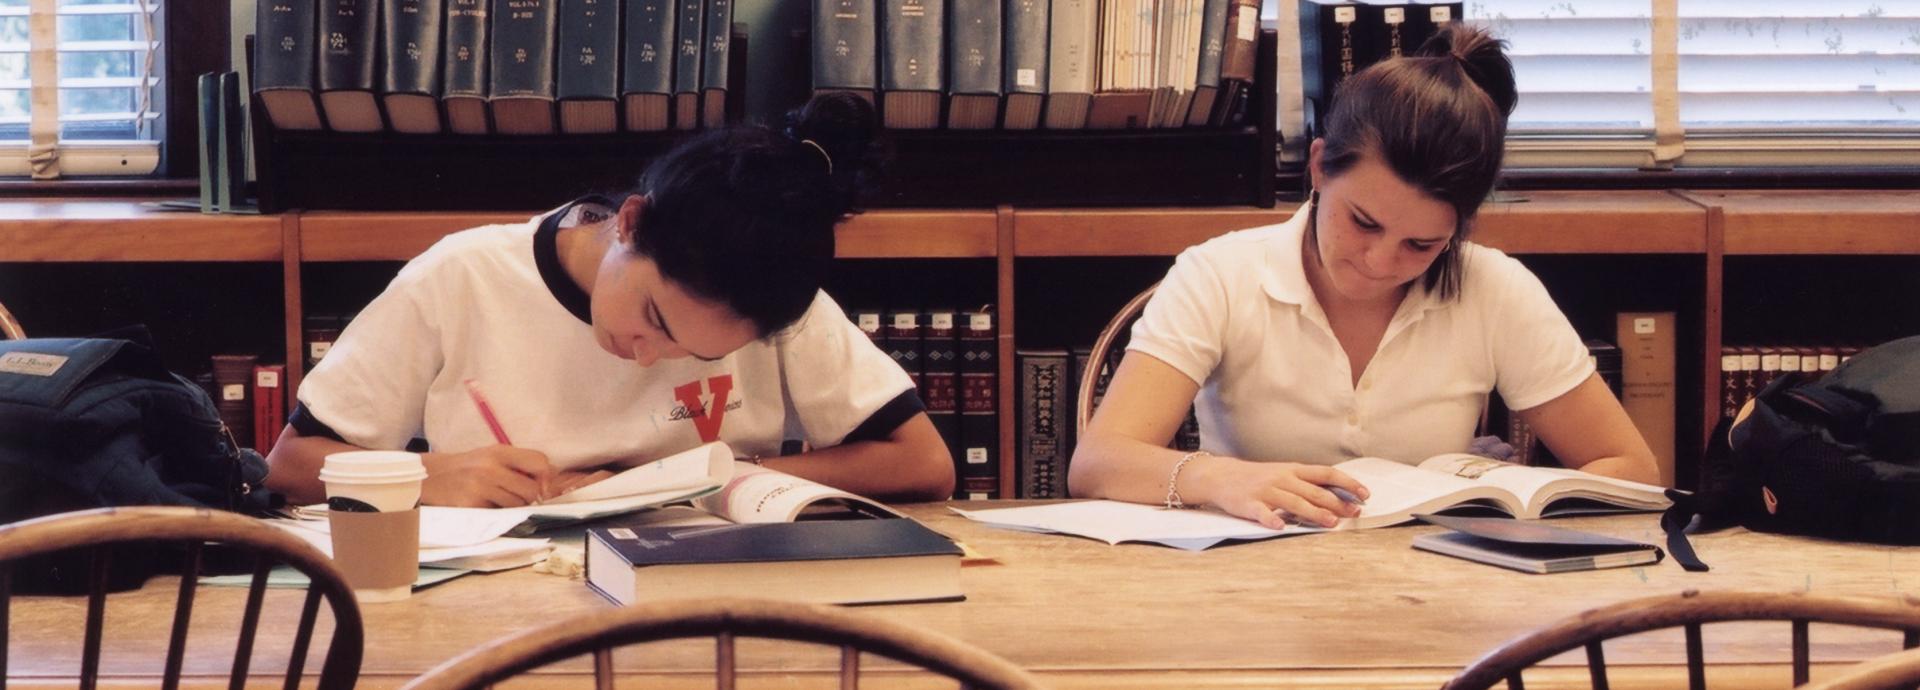 Two female students reading books and taking notes in a library